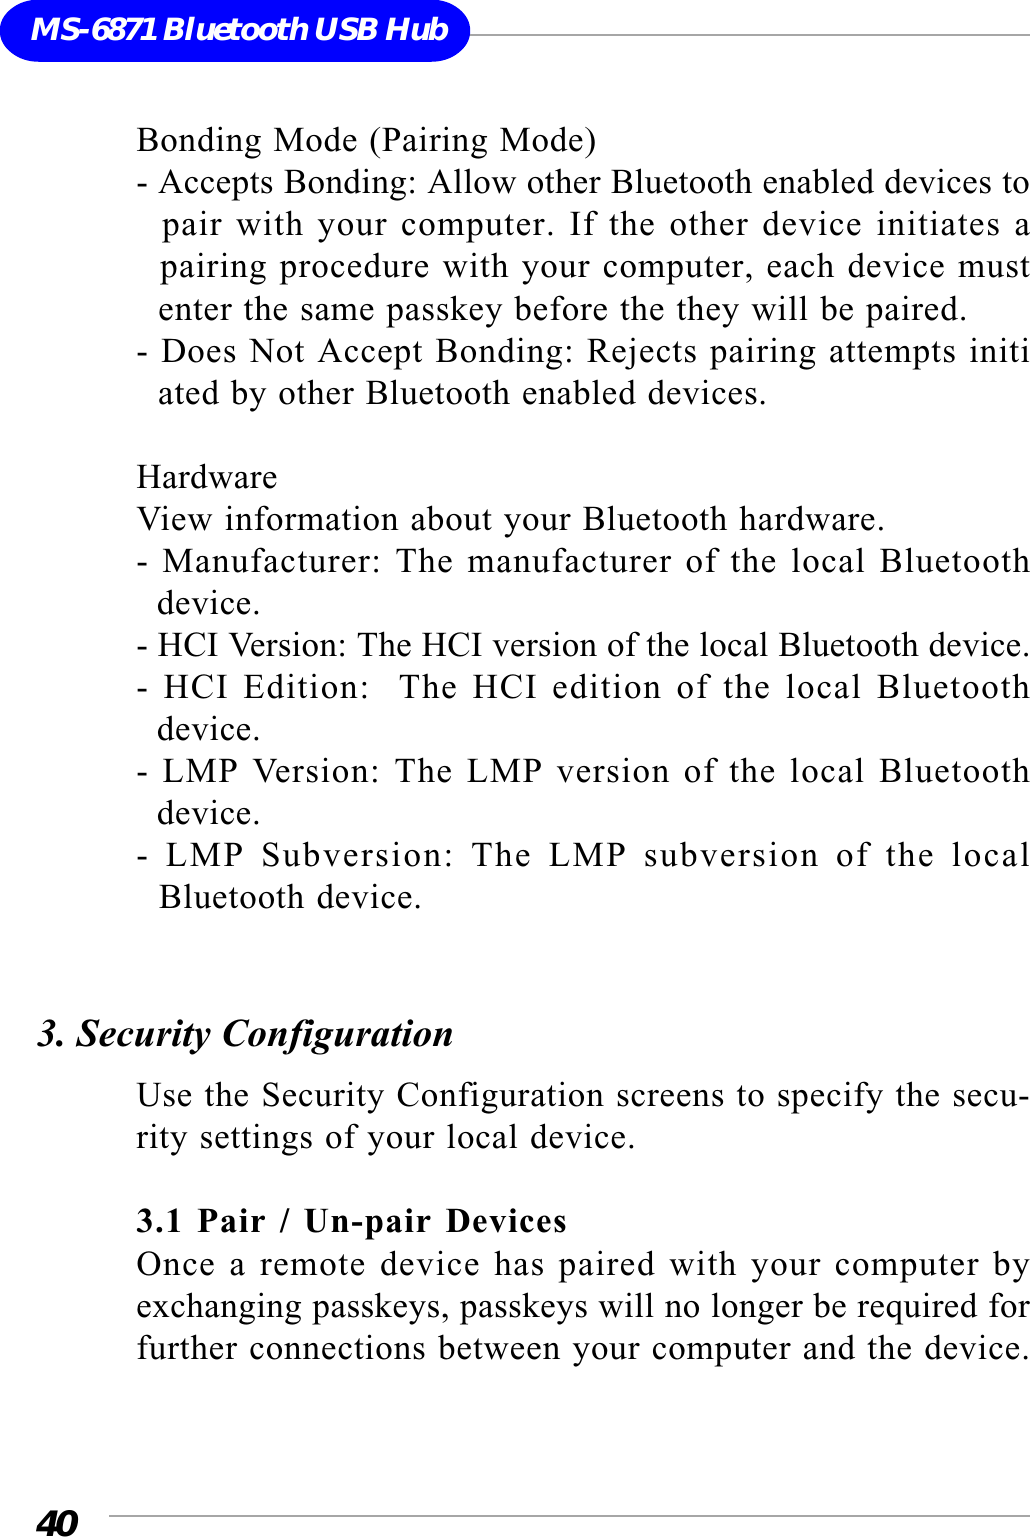 40MS-6871 Bluetooth USB HubBonding Mode (Pairing Mode)- Accepts Bonding: Allow other Bluetooth enabled devices to  pair with your computer. If the other device initiates a  pairing procedure with your computer, each device must  enter the same passkey before the they will be paired.- Does Not Accept Bonding: Rejects pairing attempts initi  ated by other Bluetooth enabled devices.HardwareView information about your Bluetooth hardware.- Manufacturer: The manufacturer of the local Bluetooth  device.- HCI Version: The HCI version of the local Bluetooth device.- HCI Edition:  The HCI edition of the local Bluetooth  device.- LMP Version: The LMP version of the local Bluetooth  device.- LMP Subversion: The LMP subversion of the local  Bluetooth device.3. Security ConfigurationUse the Security Configuration screens to specify the secu-rity settings of your local device.3.1 Pair / Un-pair DevicesOnce a remote device has paired with your computer byexchanging passkeys, passkeys will no longer be required forfurther connections between your computer and the device.